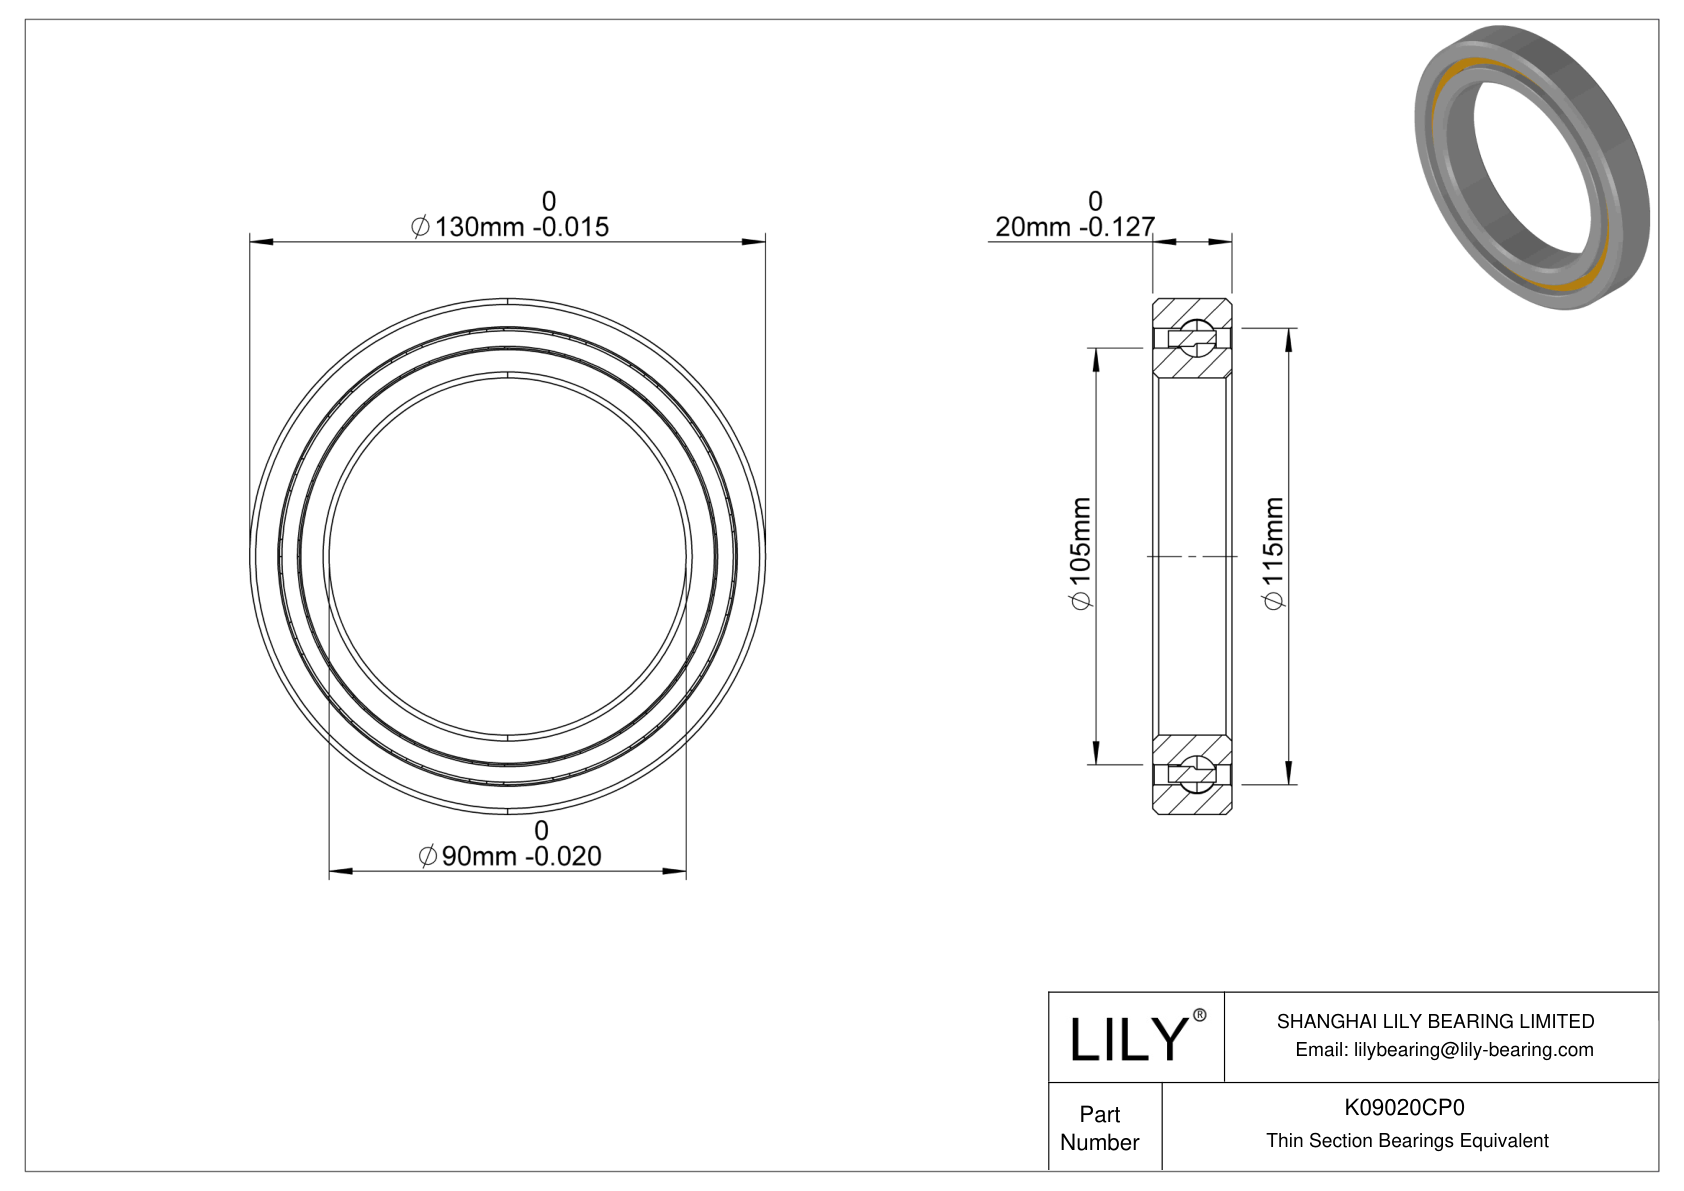 K09020CP0 Constant Section (CS) Bearings cad drawing